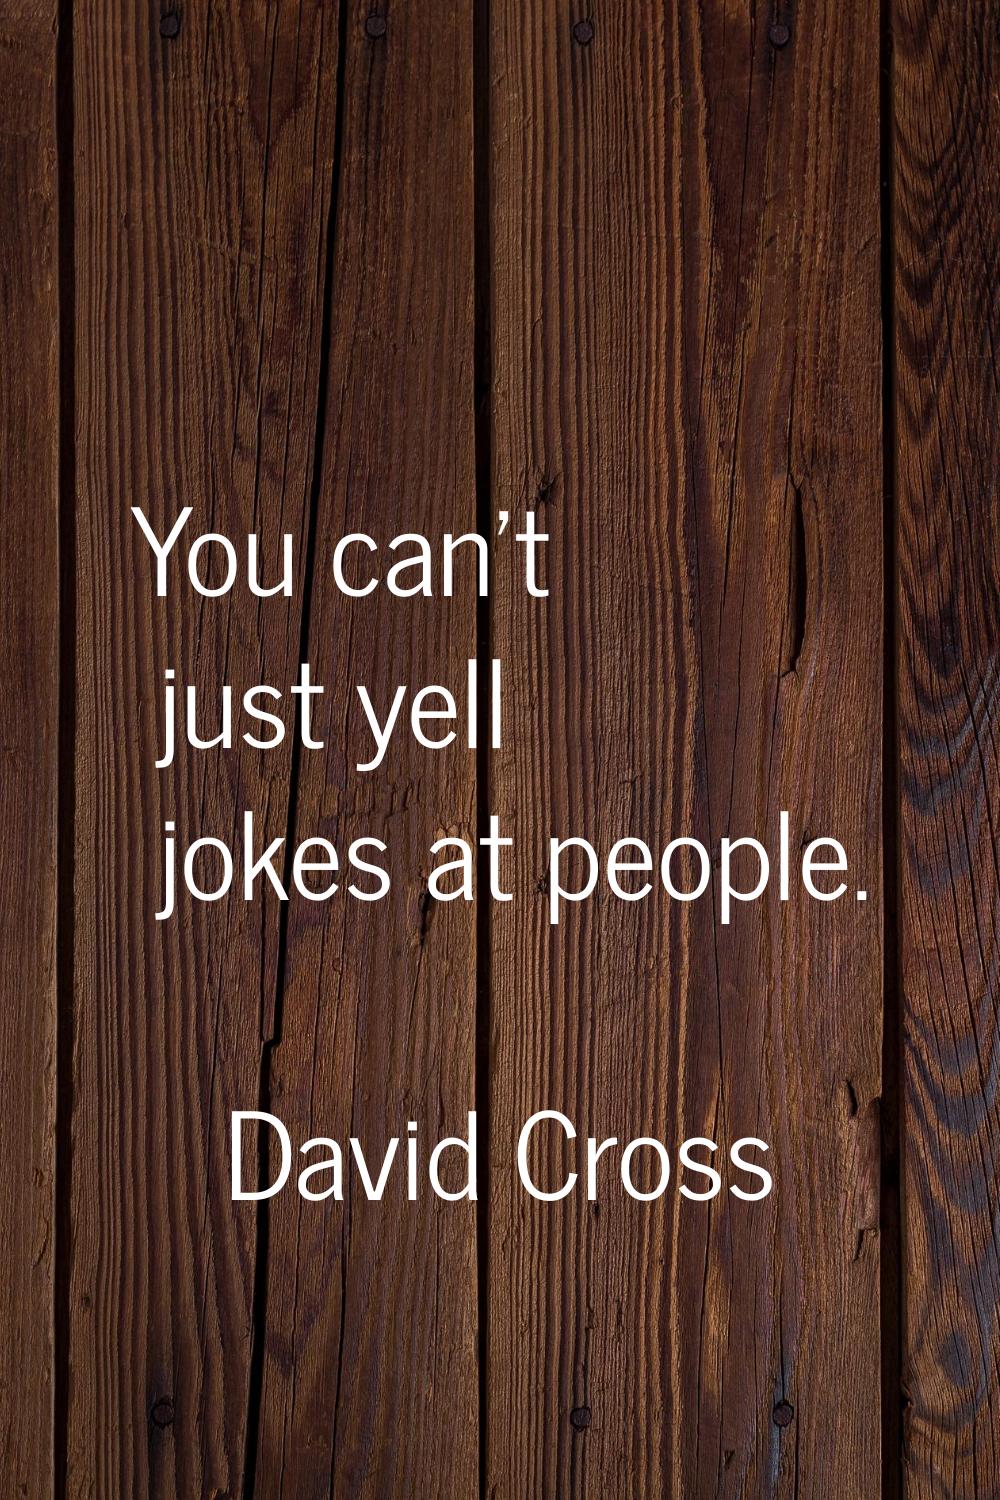 You can't just yell jokes at people.